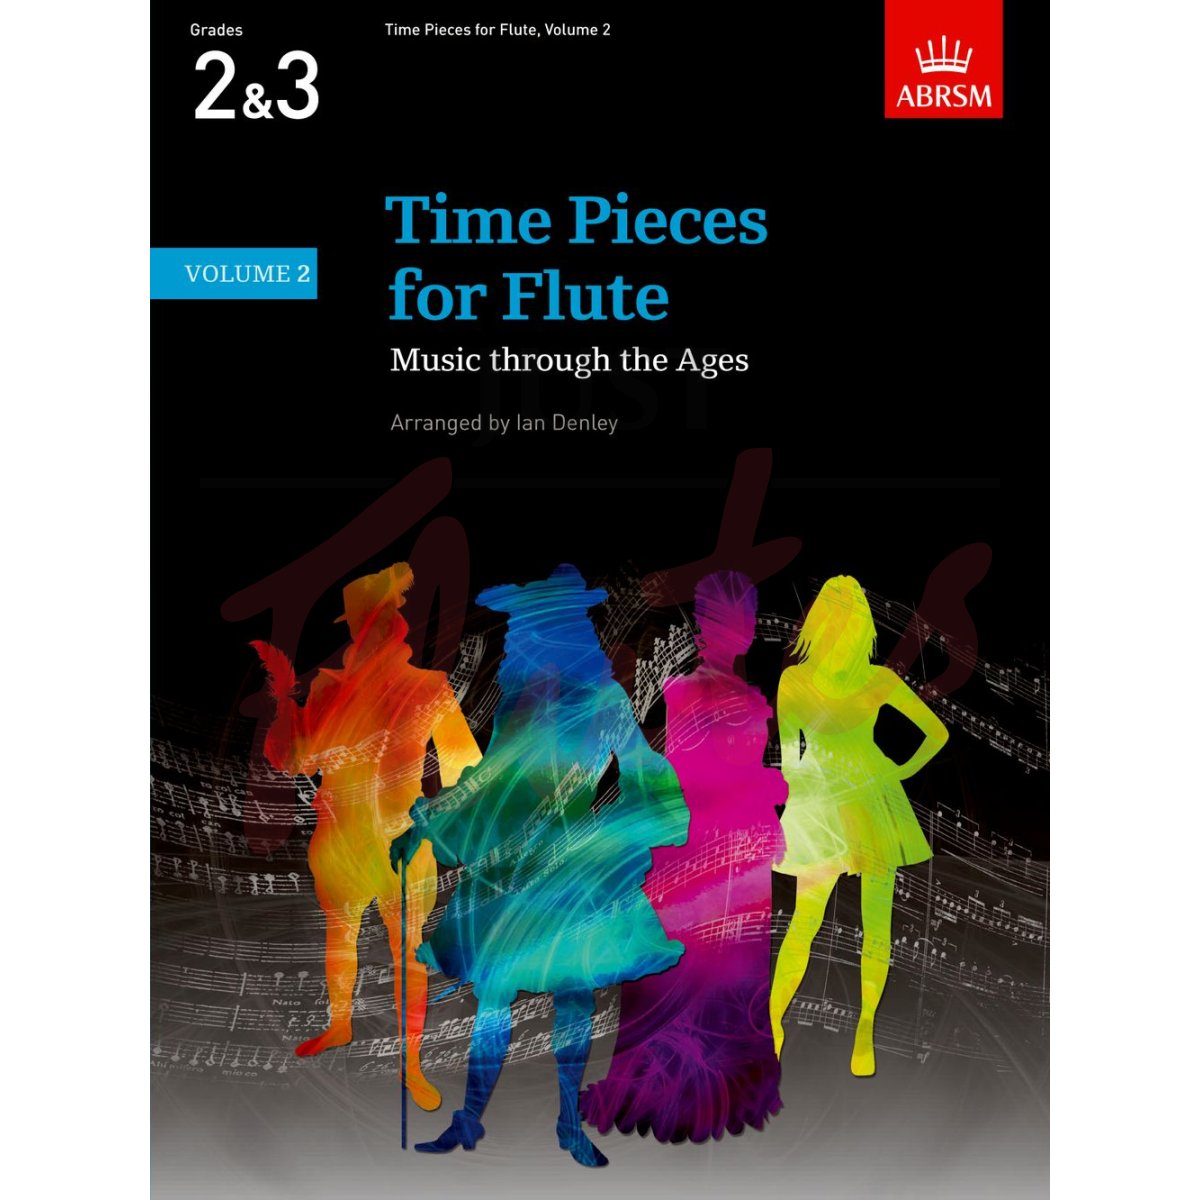 Time Pieces for Flute